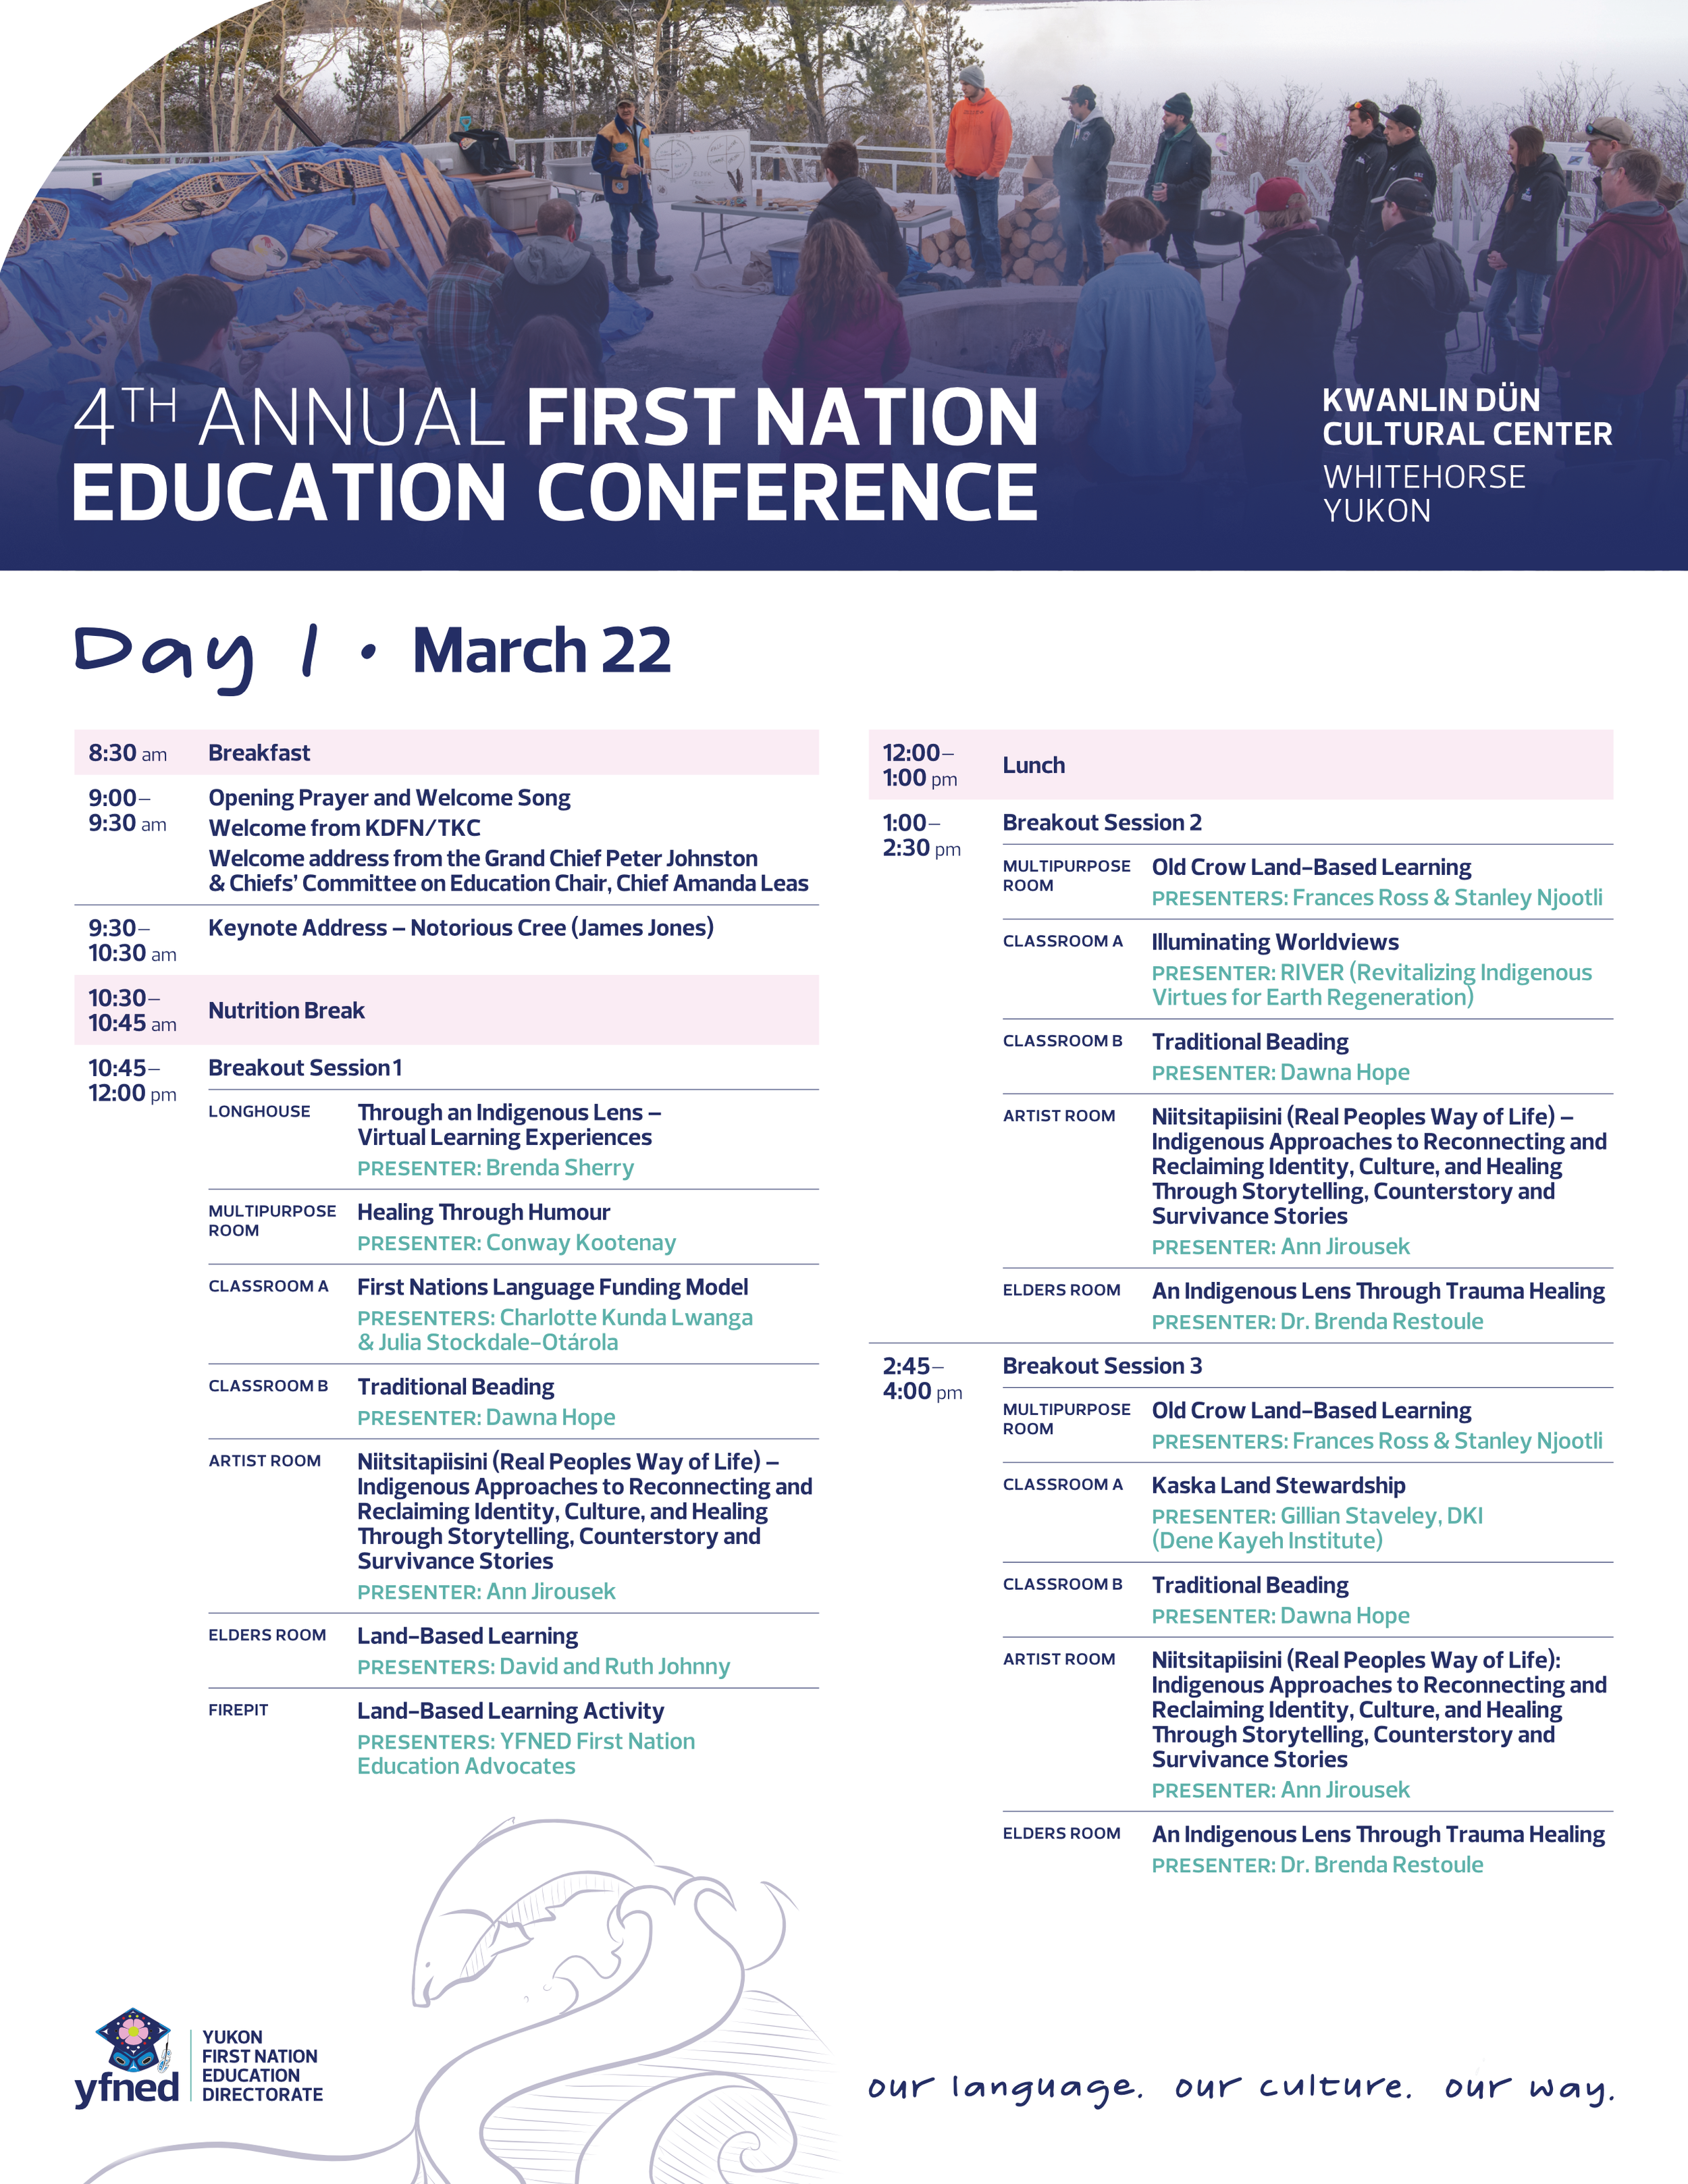 YFNED - 4th Annual First Nation Education Conference Program (2022Feb28)_1.png